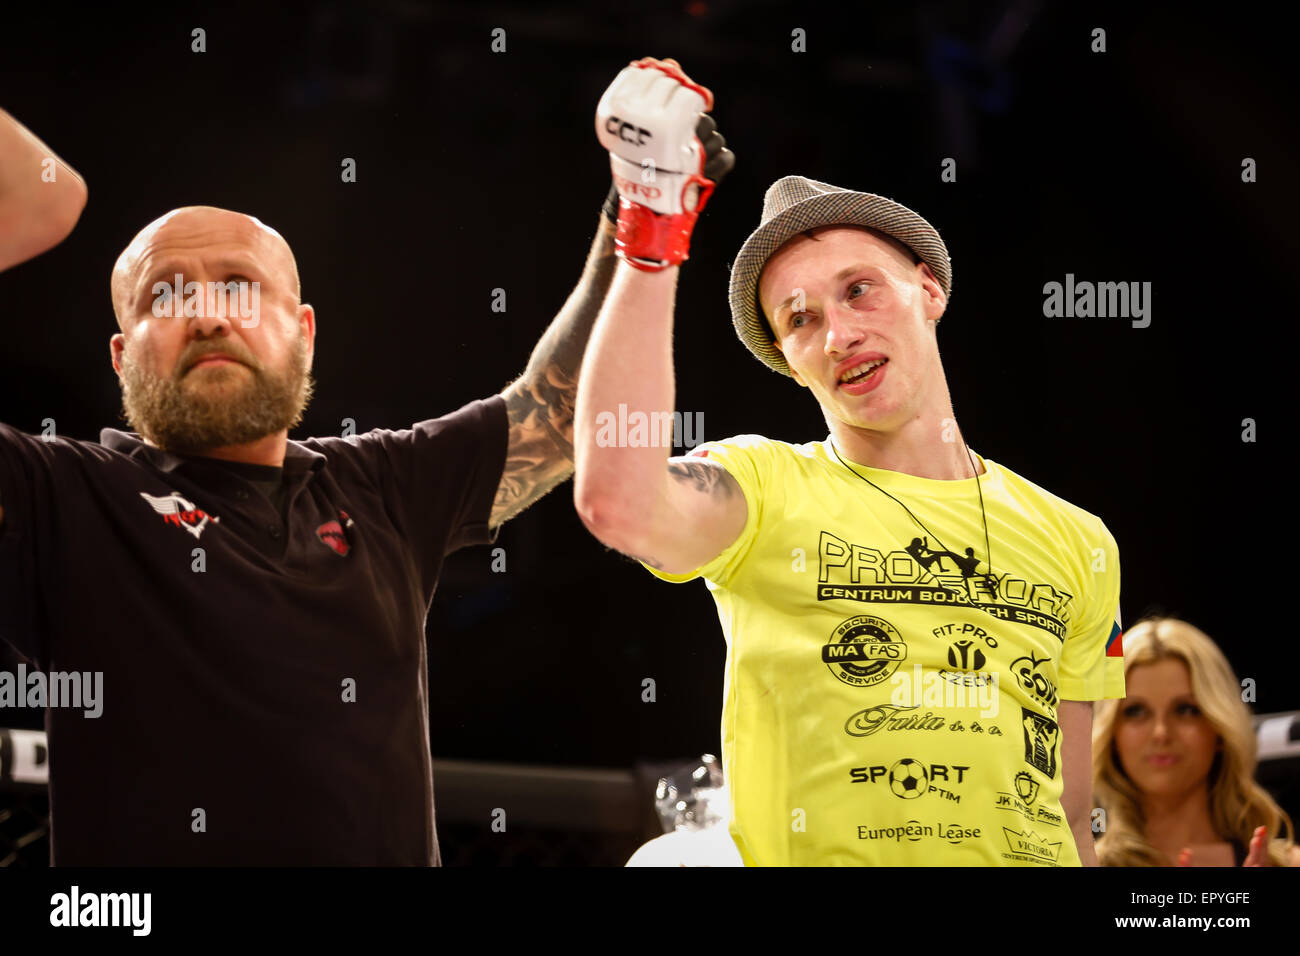 Brno, Czech Republic - May 22, 2015. MMA Cage welterweight fight ...